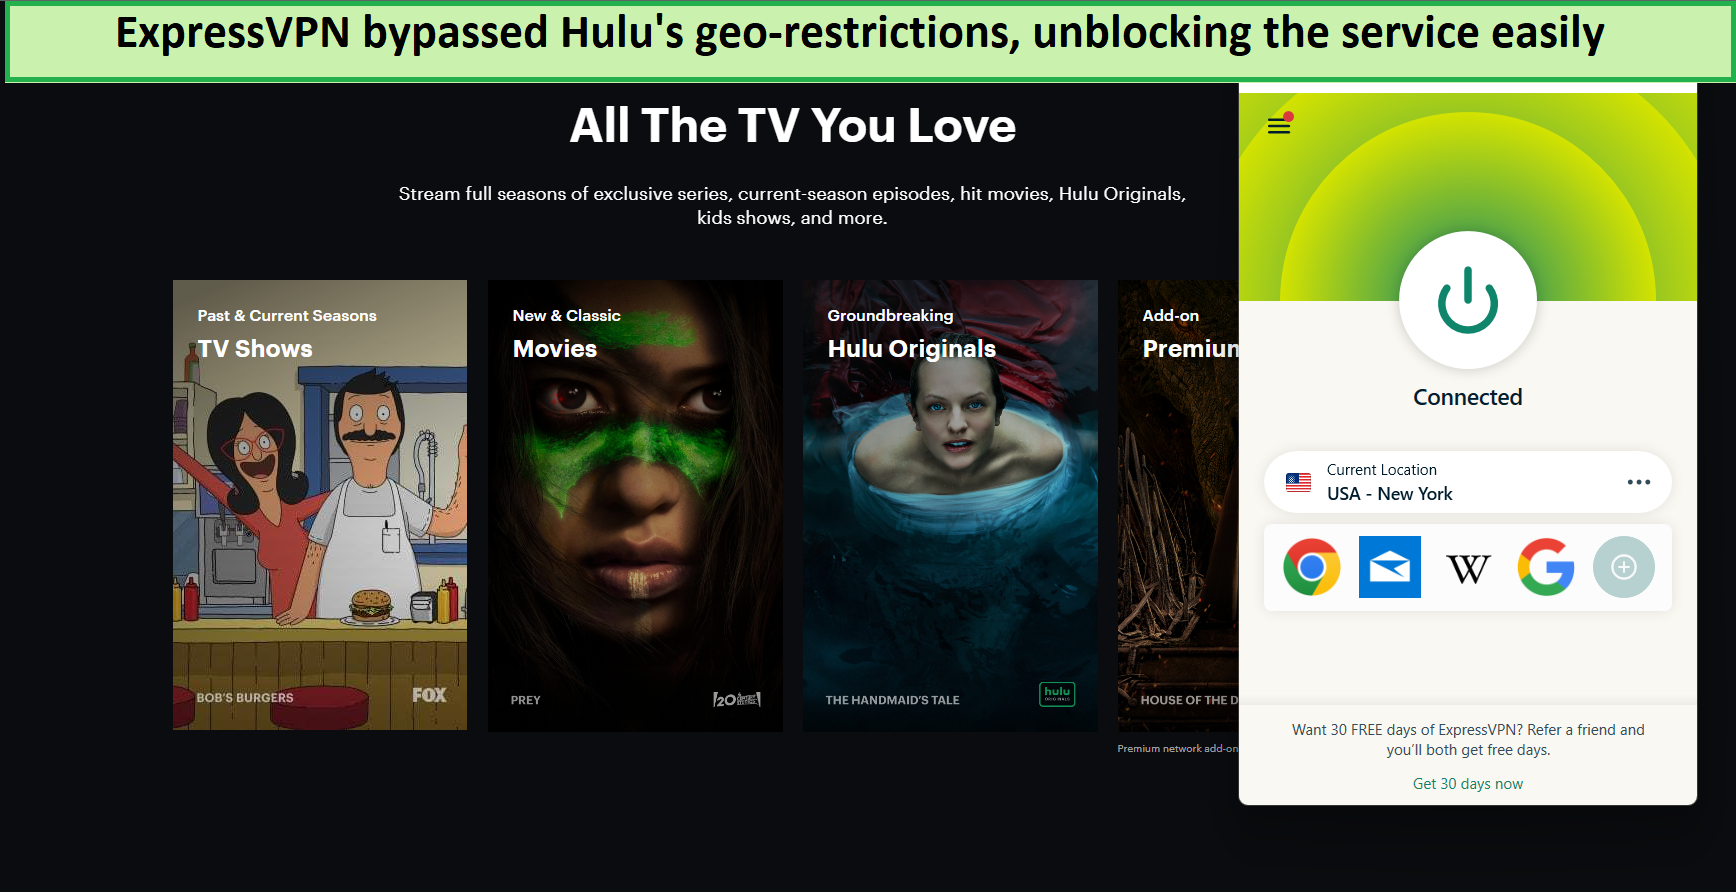 unblock-hulu-on-iphone-in-Hong Kong-with-expressvpn-easily